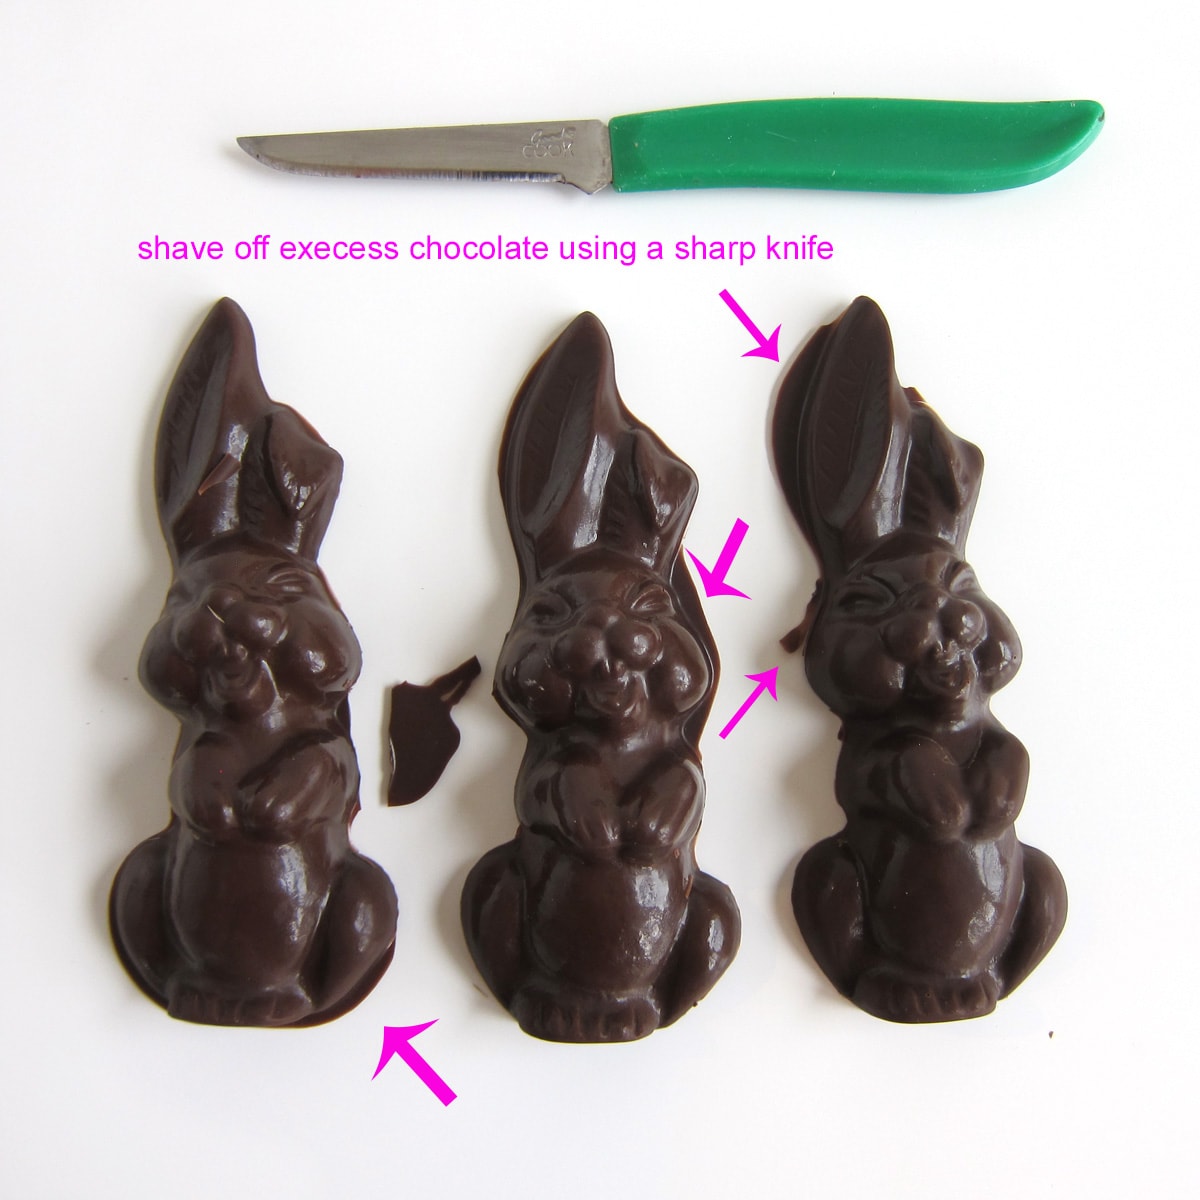 chocolate bunnies needing excess chocolate to be shaved off using a knife